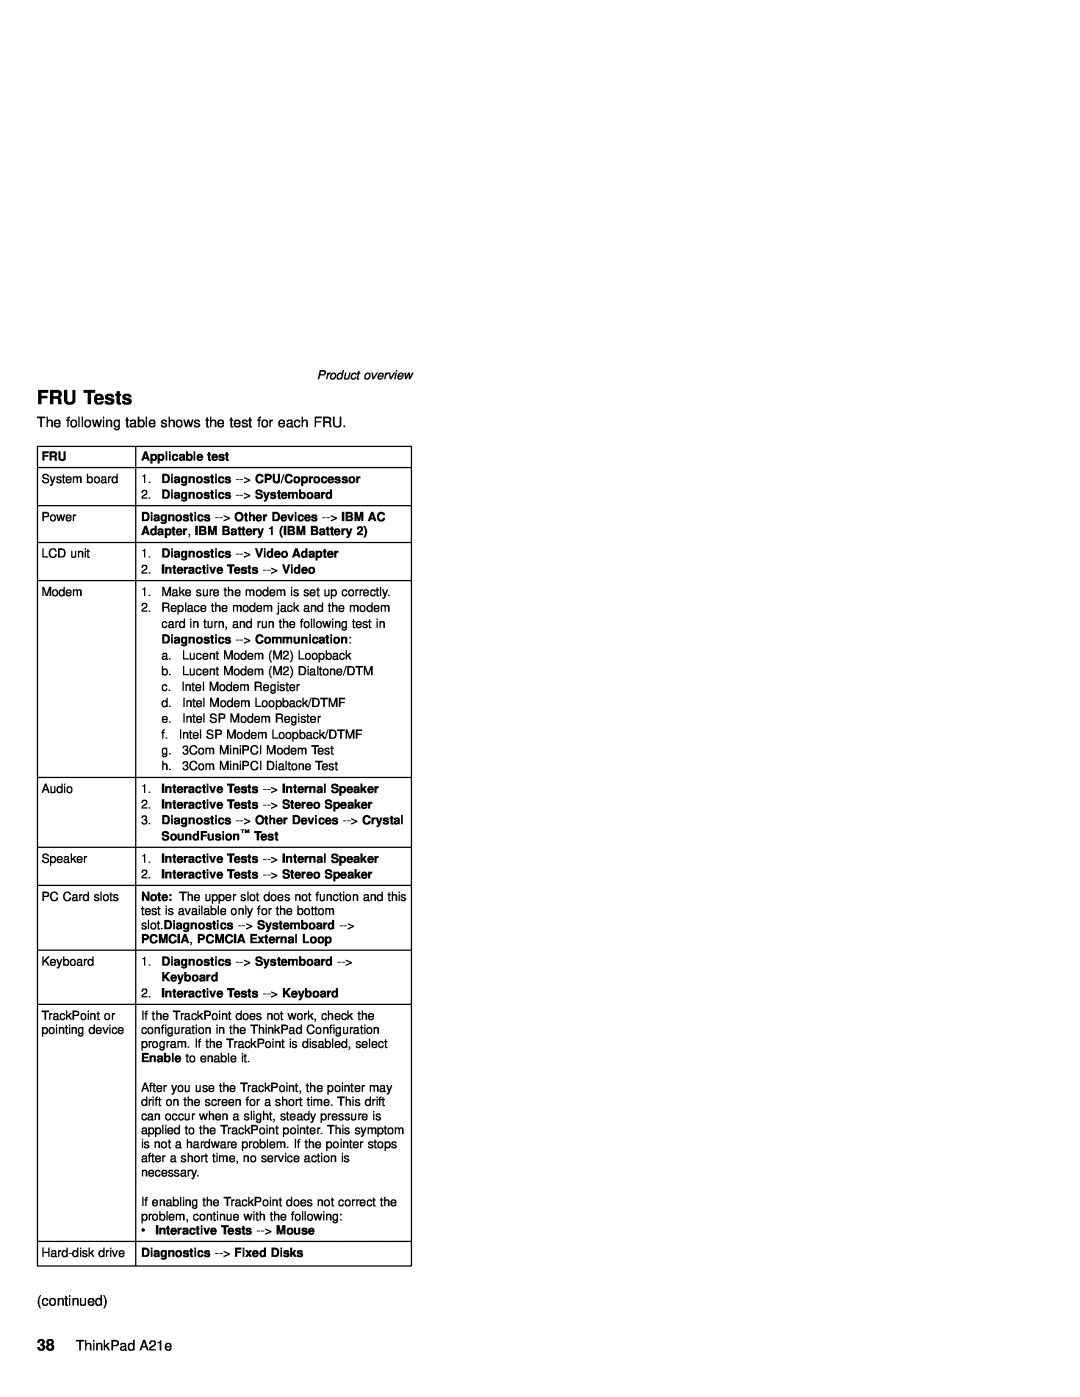 IBM MT 2632 manual FRU Tests, The following table shows the test for each FRU, continued, ThinkPad A21e 